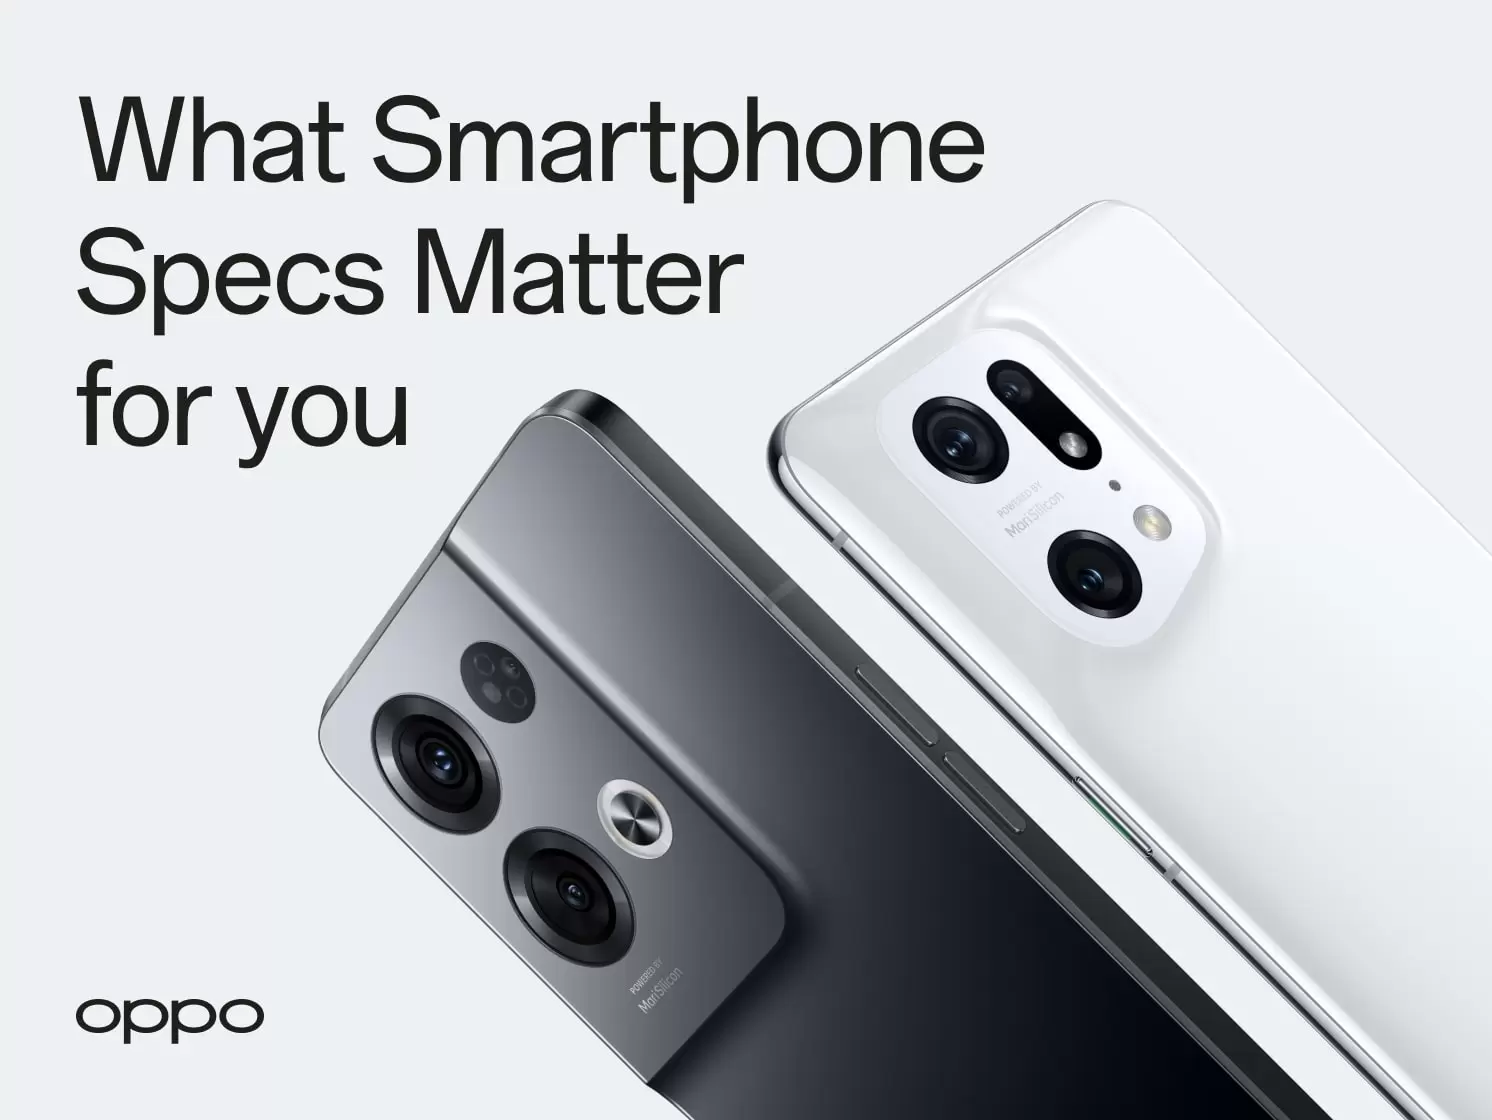 What Smartphone Specs Matter for you